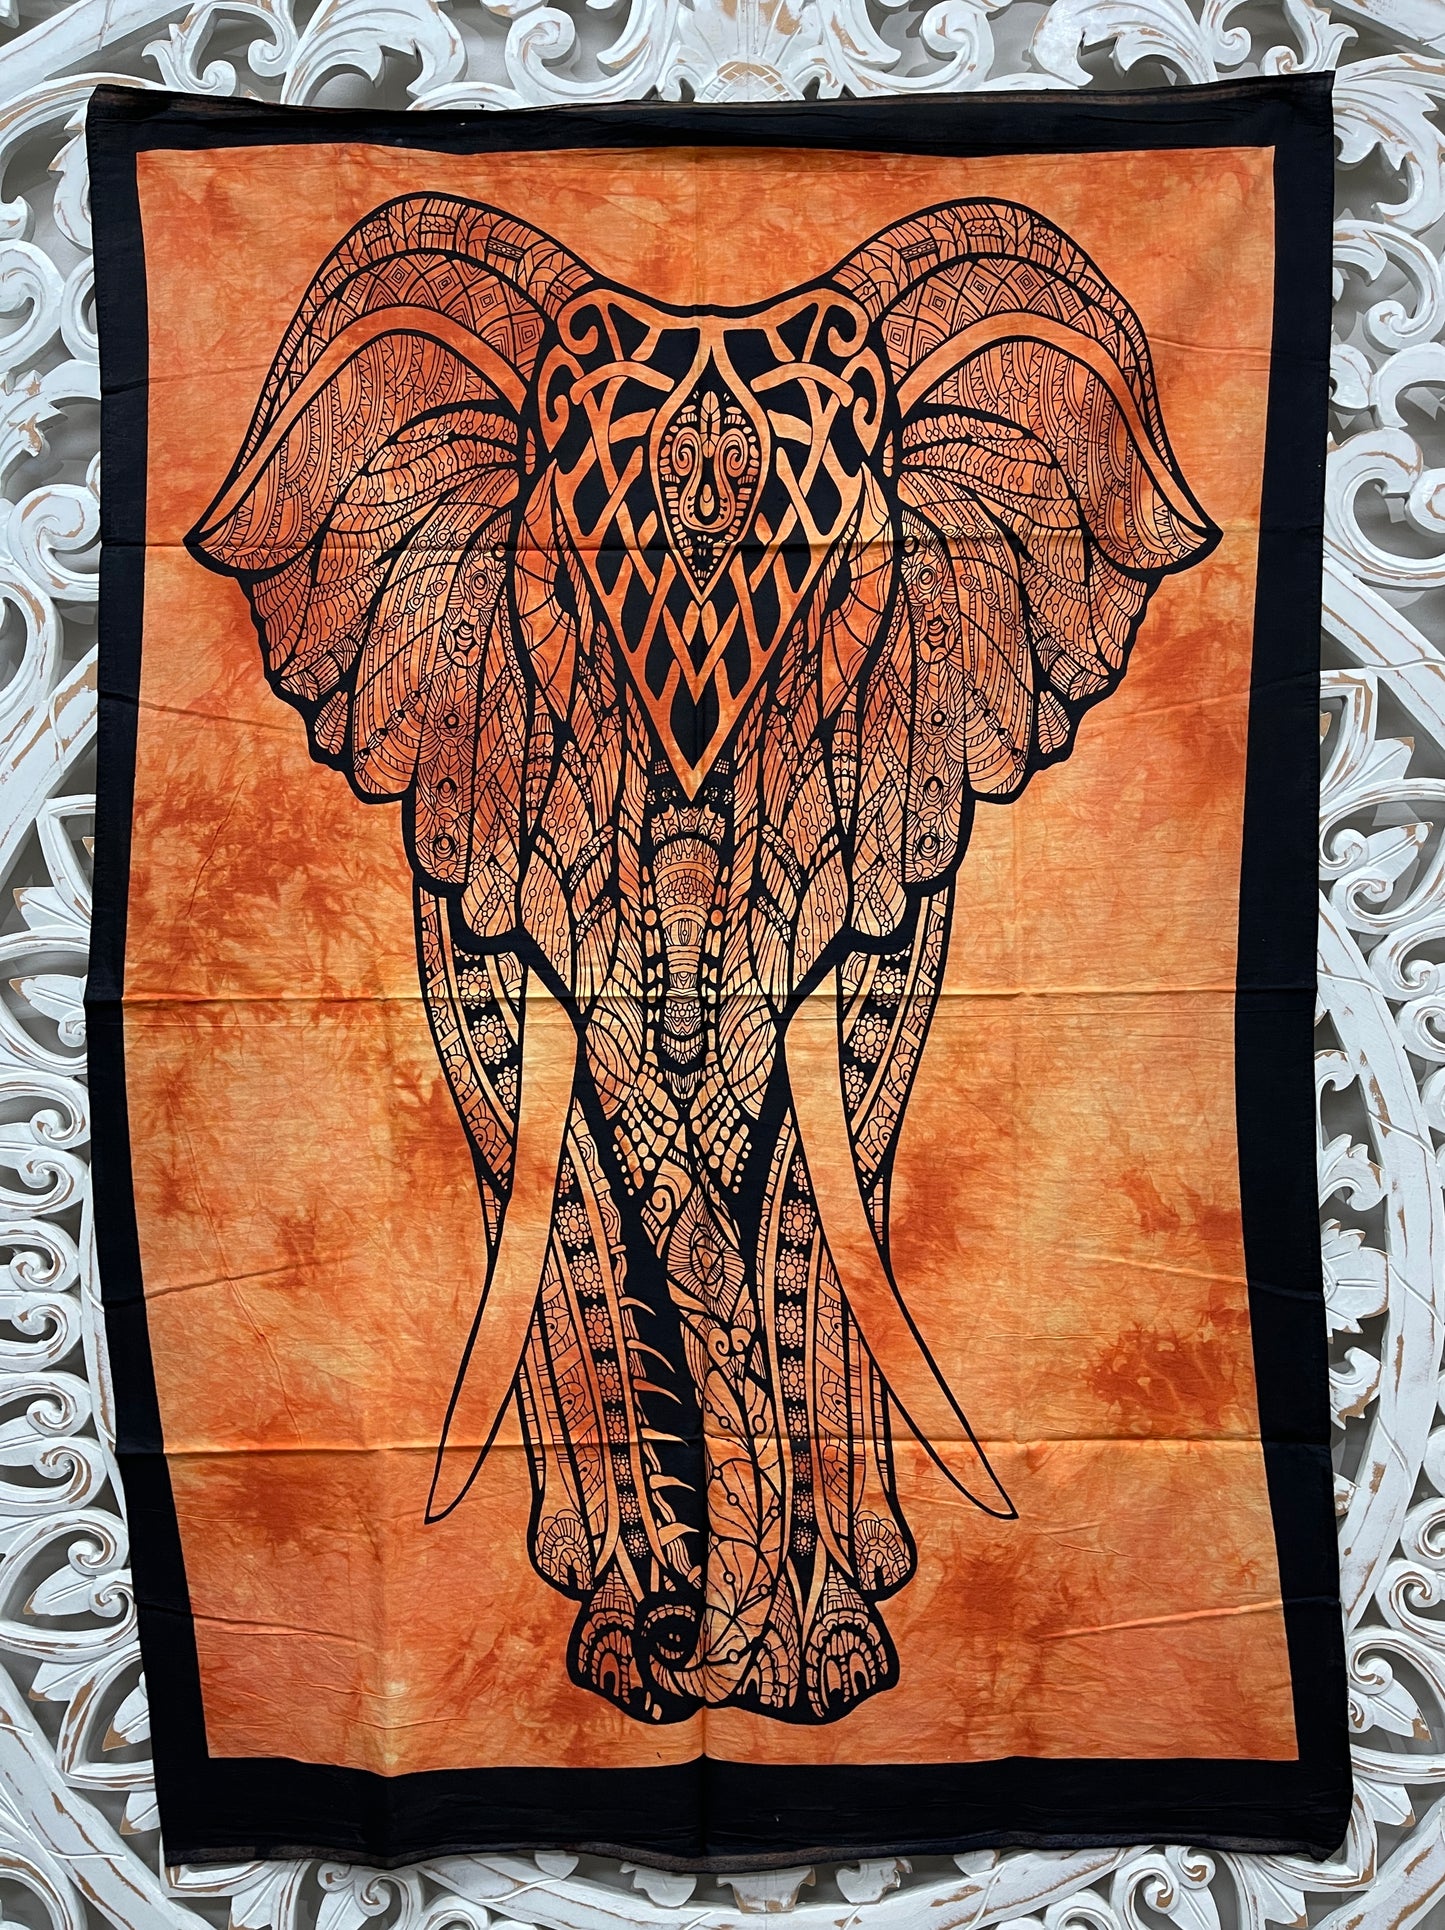 Hand printed Fabric Posters Mini Elephant Tapestries Wall Hangings - Available in 5 Colors